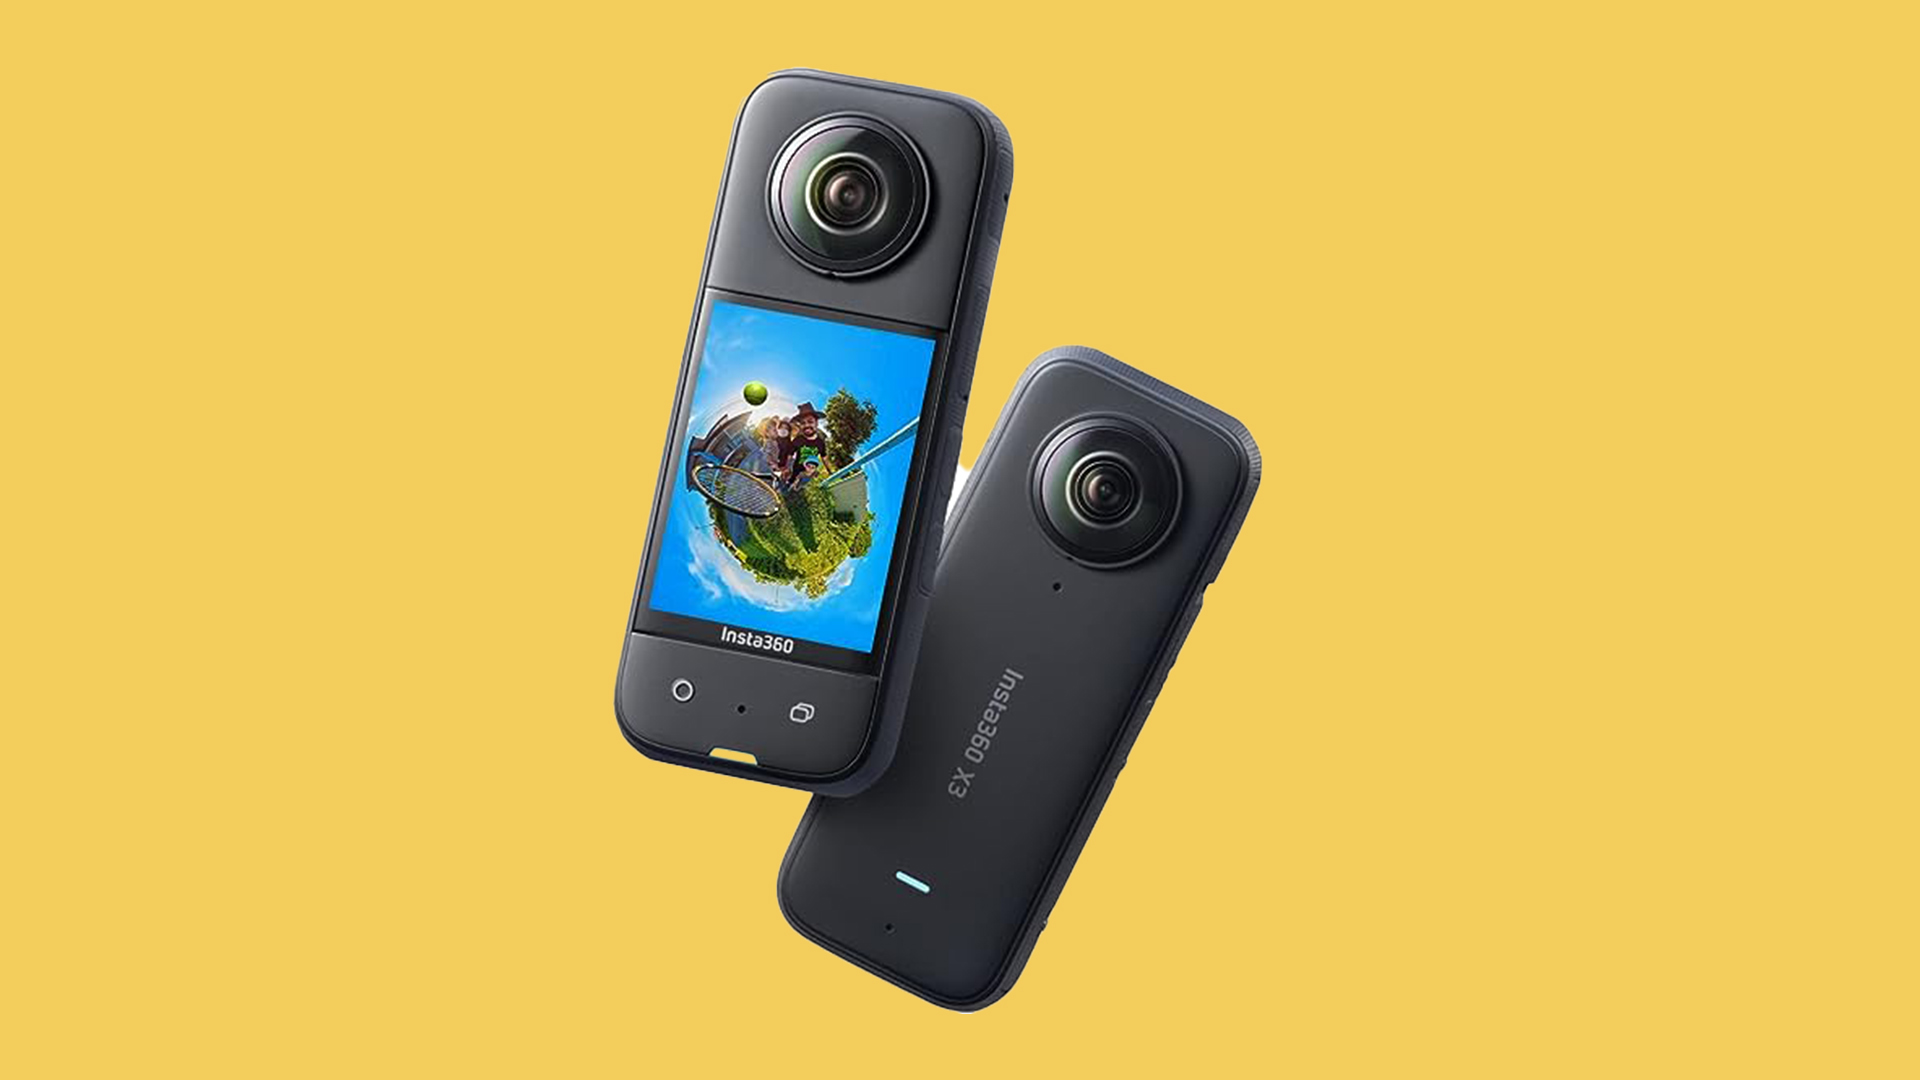 https://www.thedrive.com/uploads/2019/10/26/Insta360-X3-is-the-best-overall-motorcycle-dash-cam.jpg?auto=webp